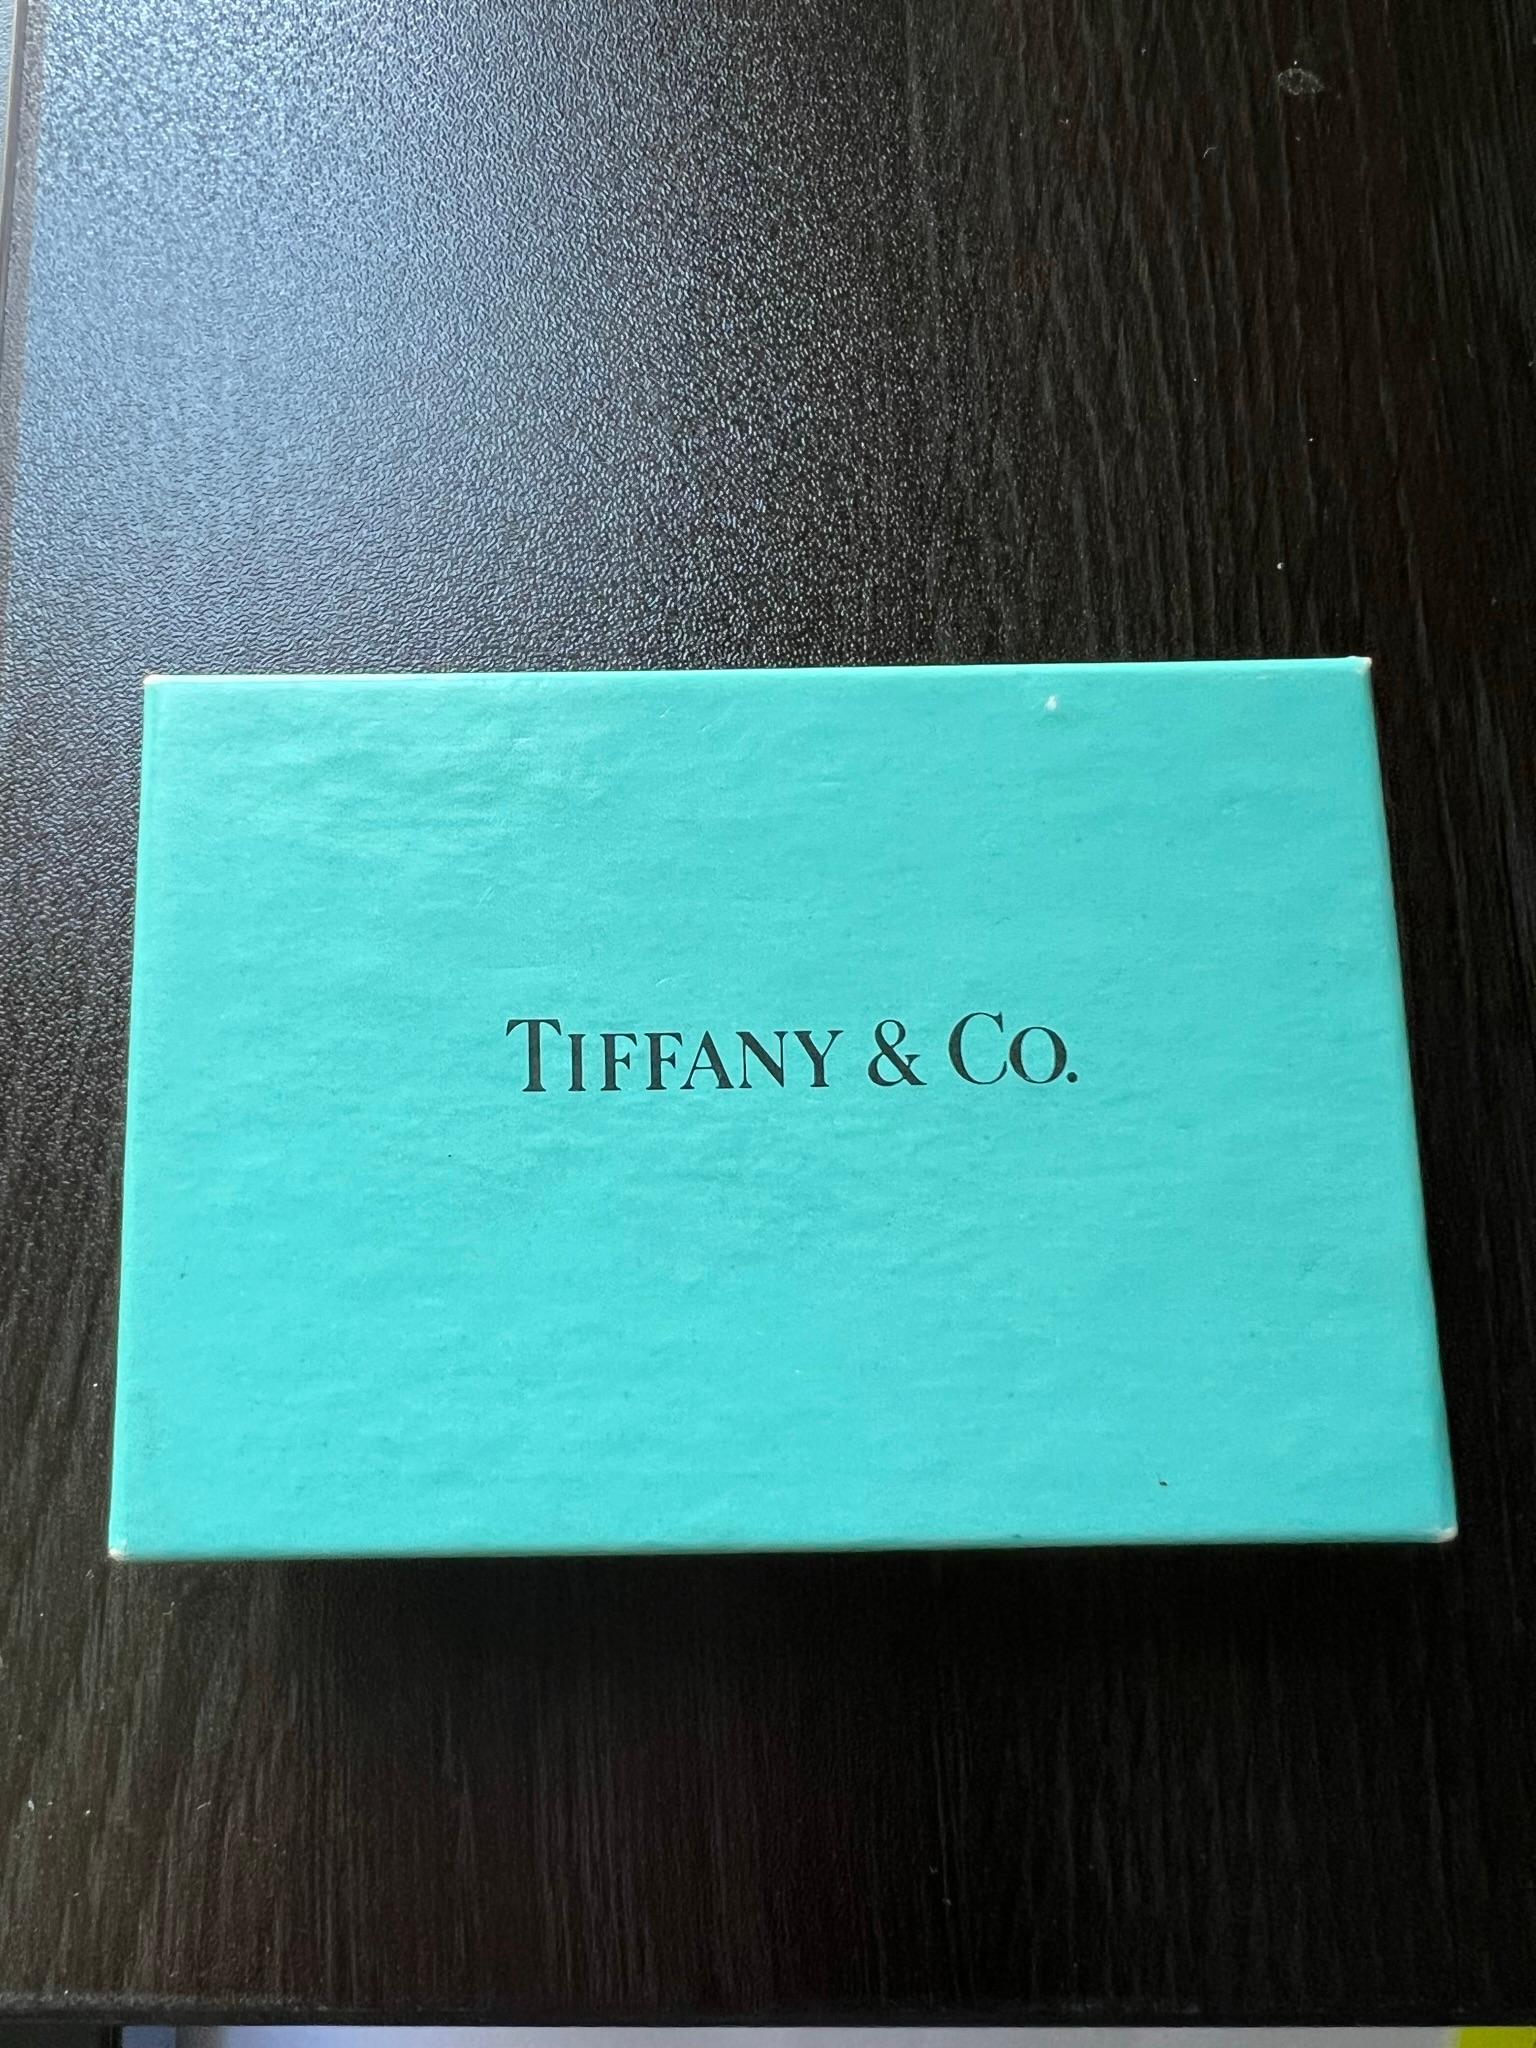 tiffany picasso earrings